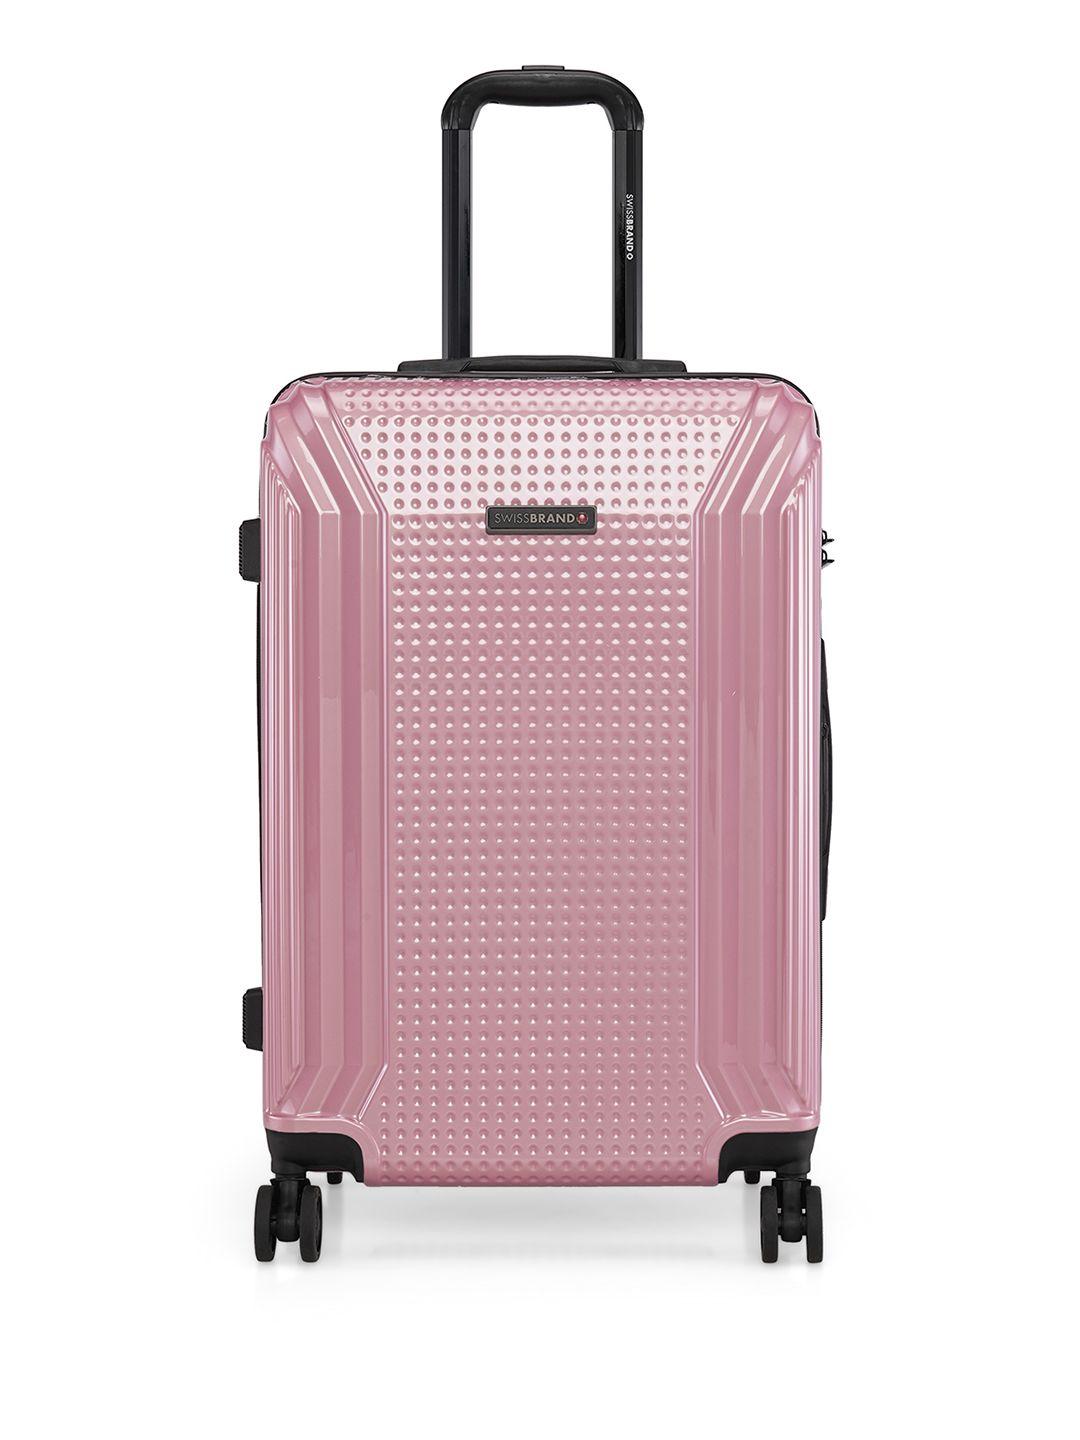 swiss brand rose gold-toned textured vernier hard-sided medium trolley suitcase